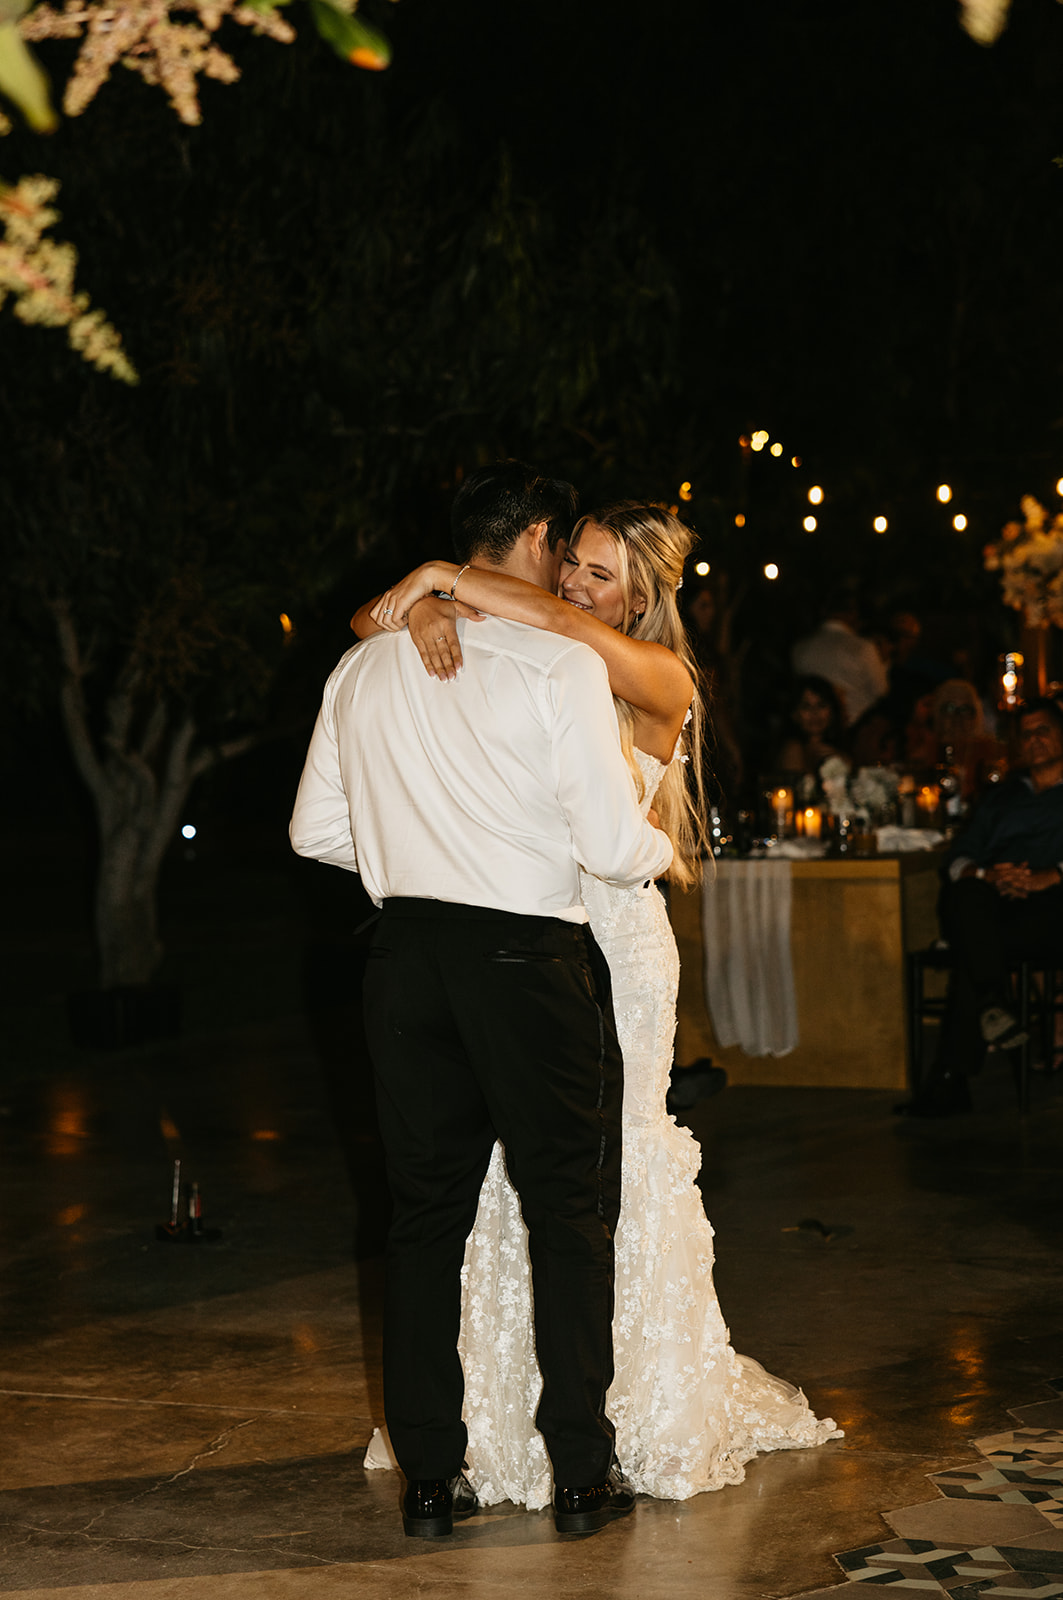 Bride and groom's first dance at their reception at Acre Resort Cabo